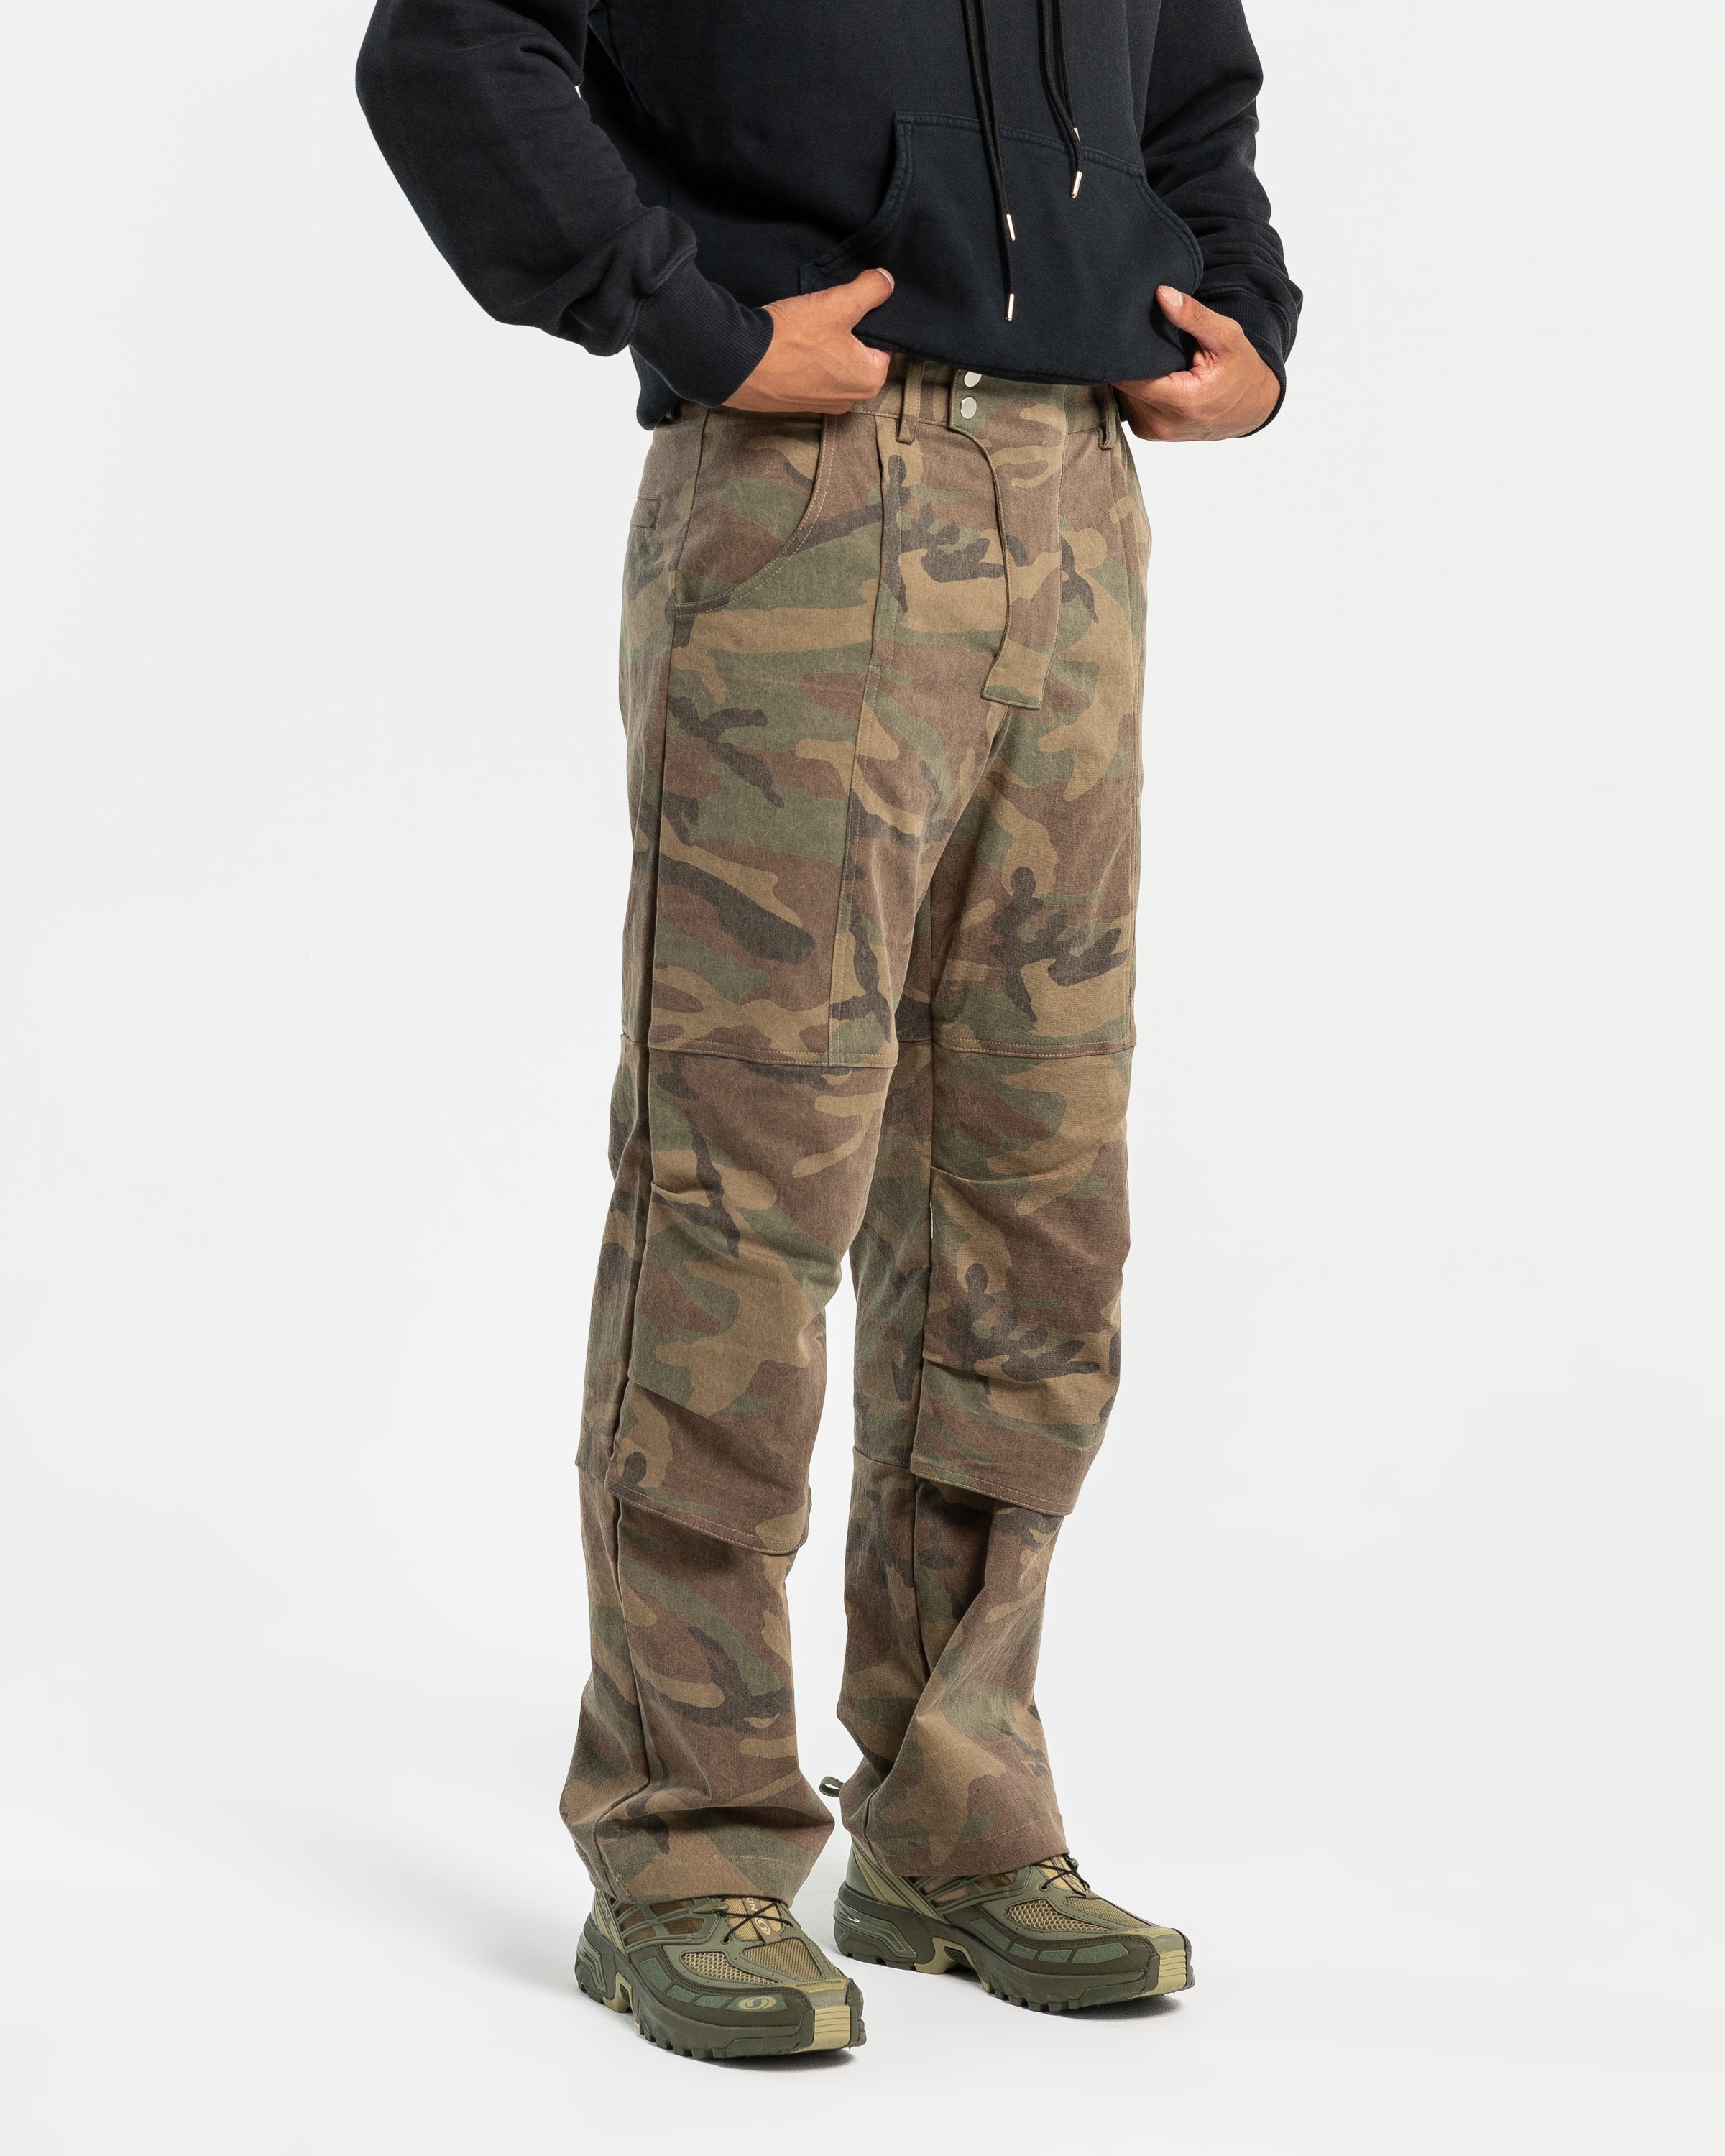 Team Pant Vintage Selvedge in Military Camo